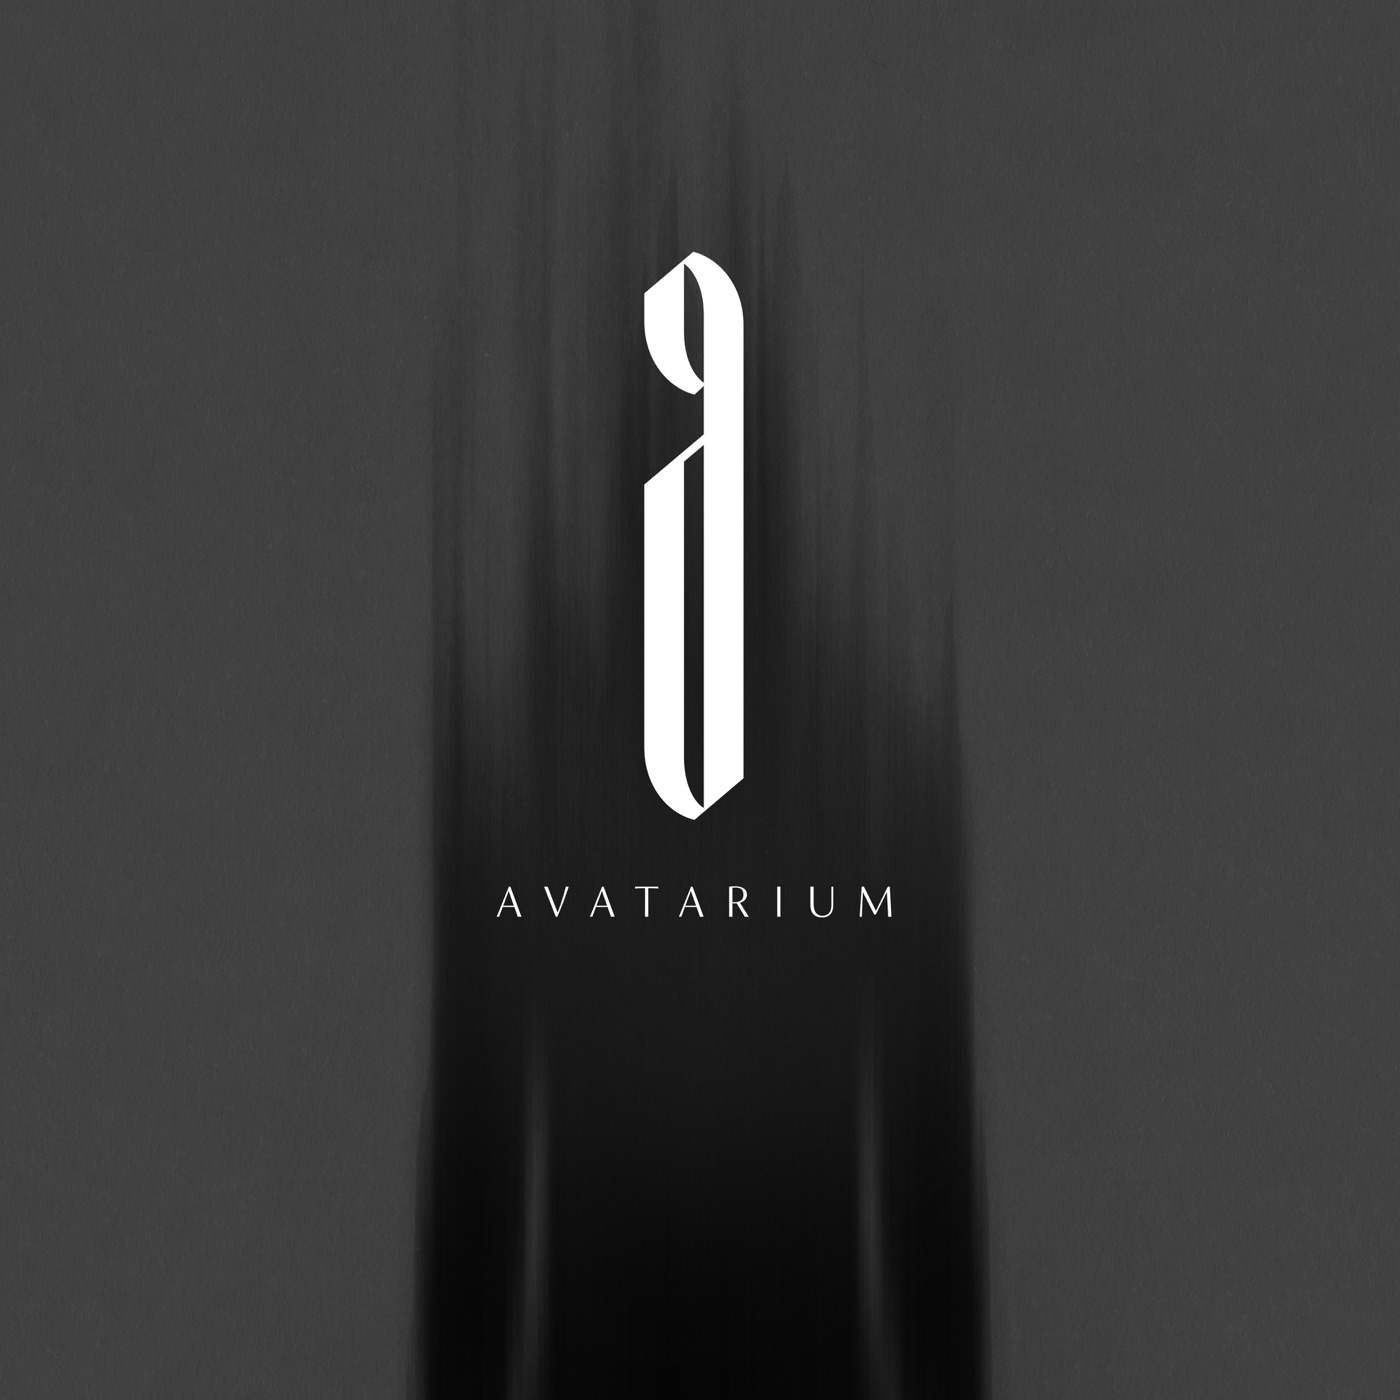 Avatarium - The Fire I Long For (2019)